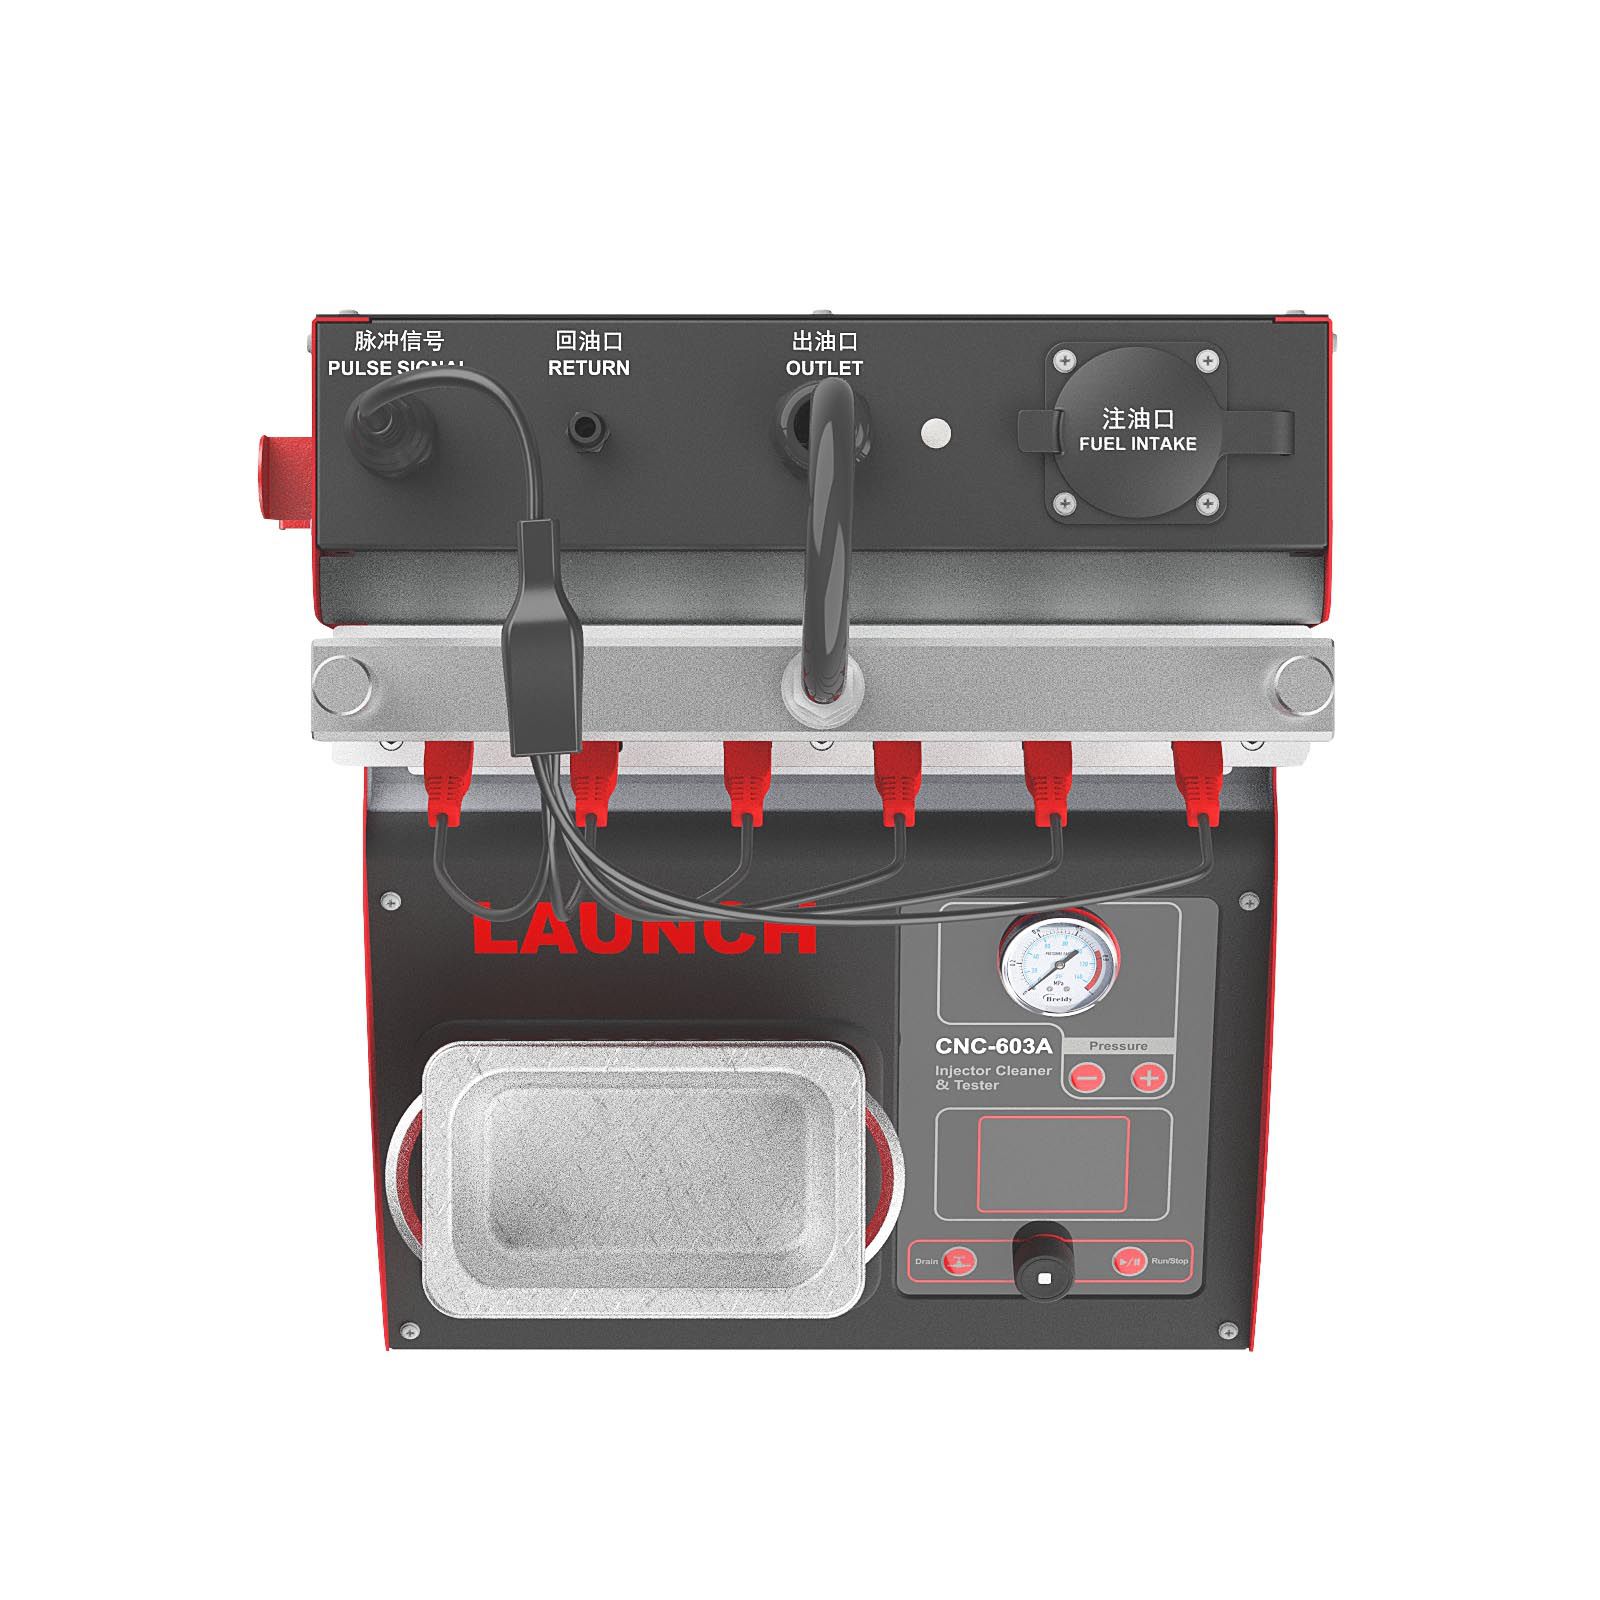 Launch CNC603A Exclusive Ultrasonic Fuel Injector Cleaner Cleaning Machine 4/6 Cylinder Fuel Injector Tester 220V/110V